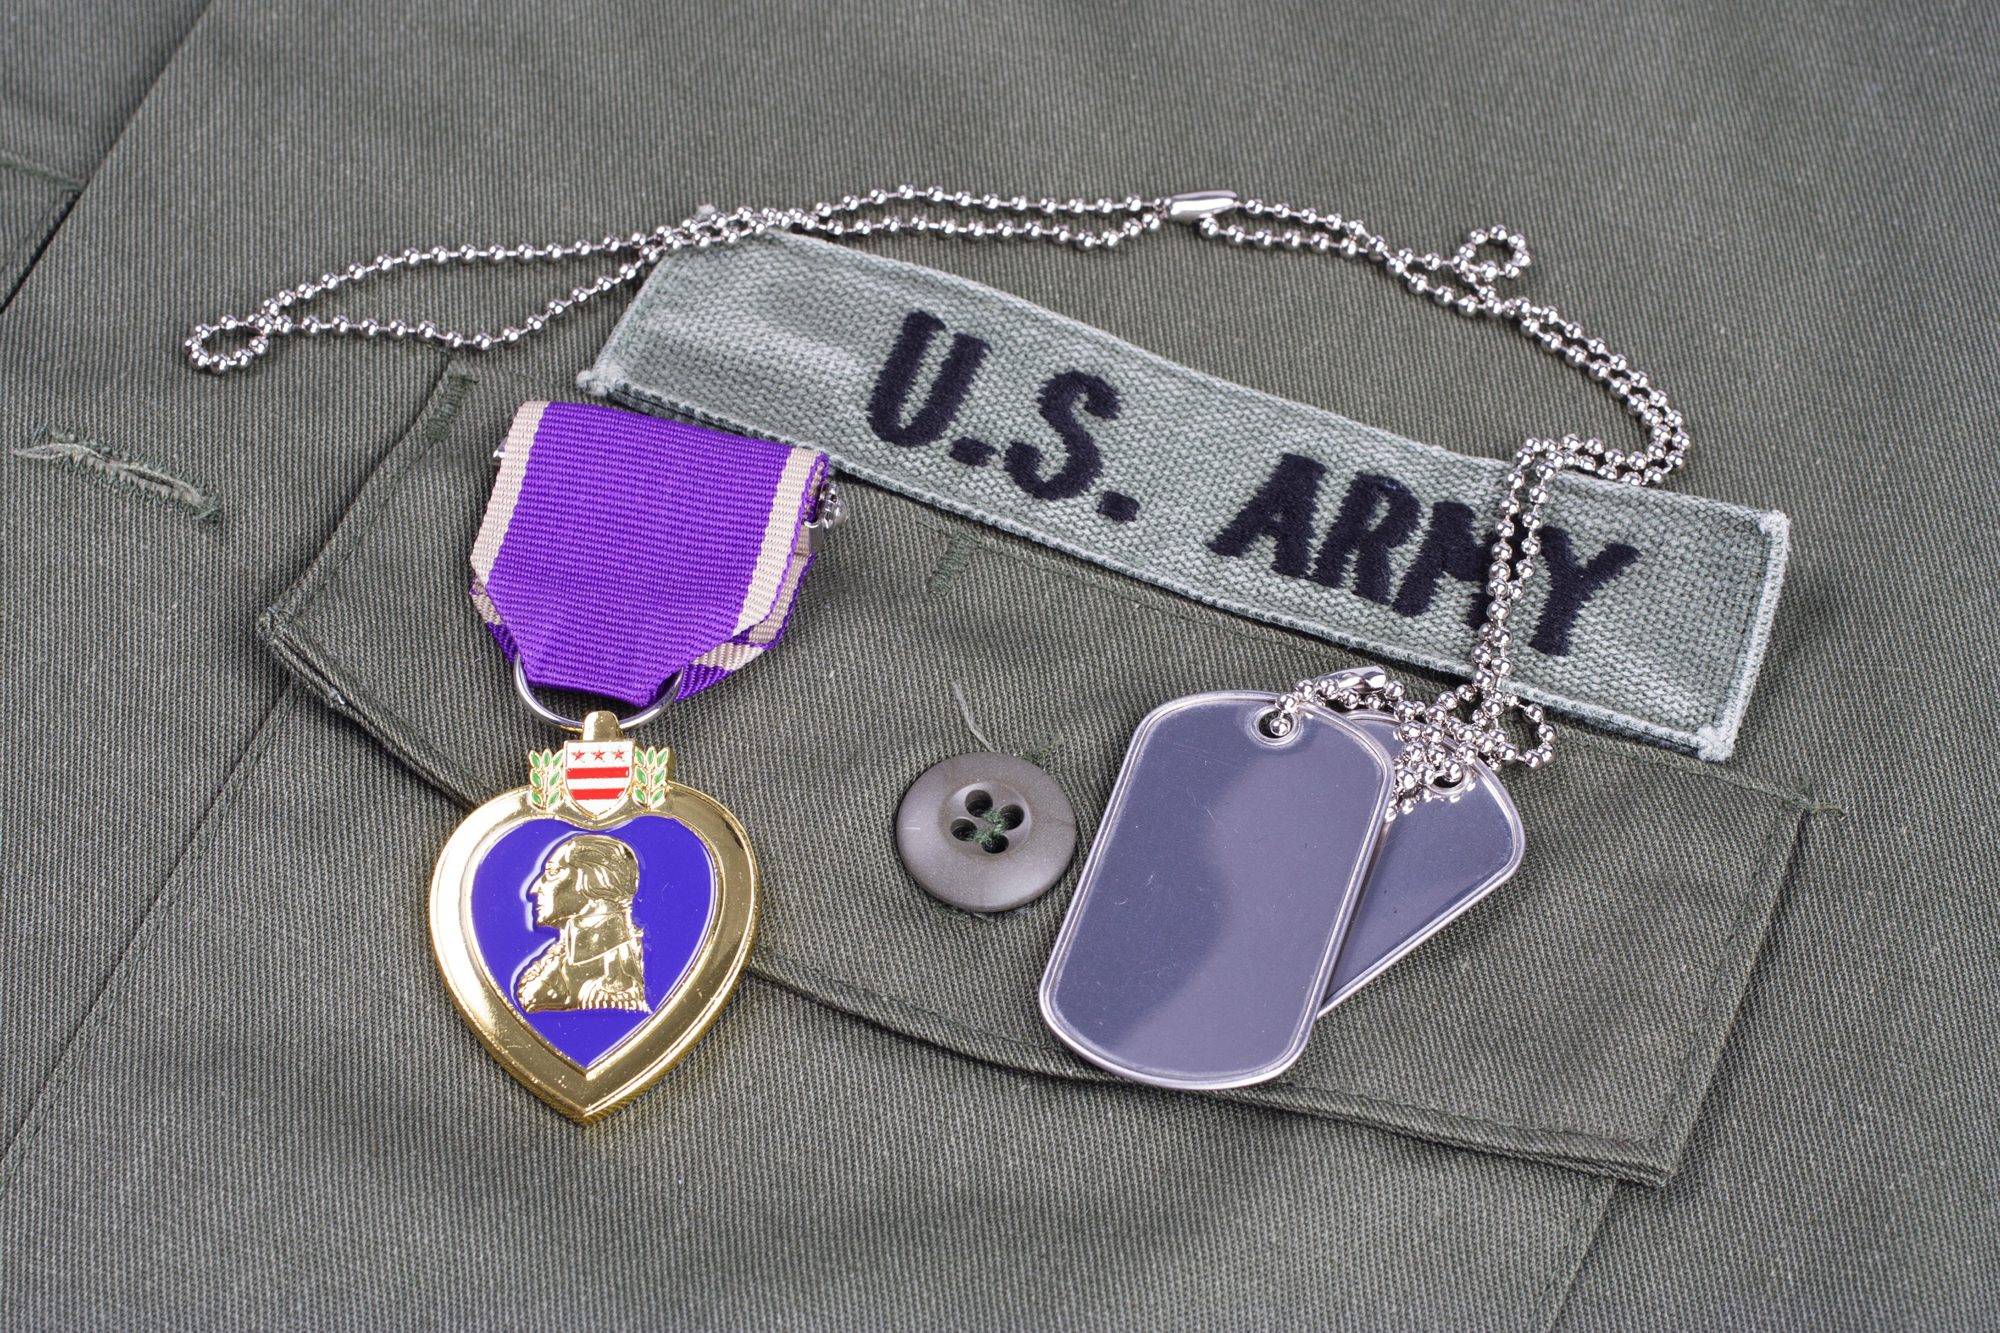 Purple Hearts - Military tags and Purple Heart award on US ARMY olive green uniform